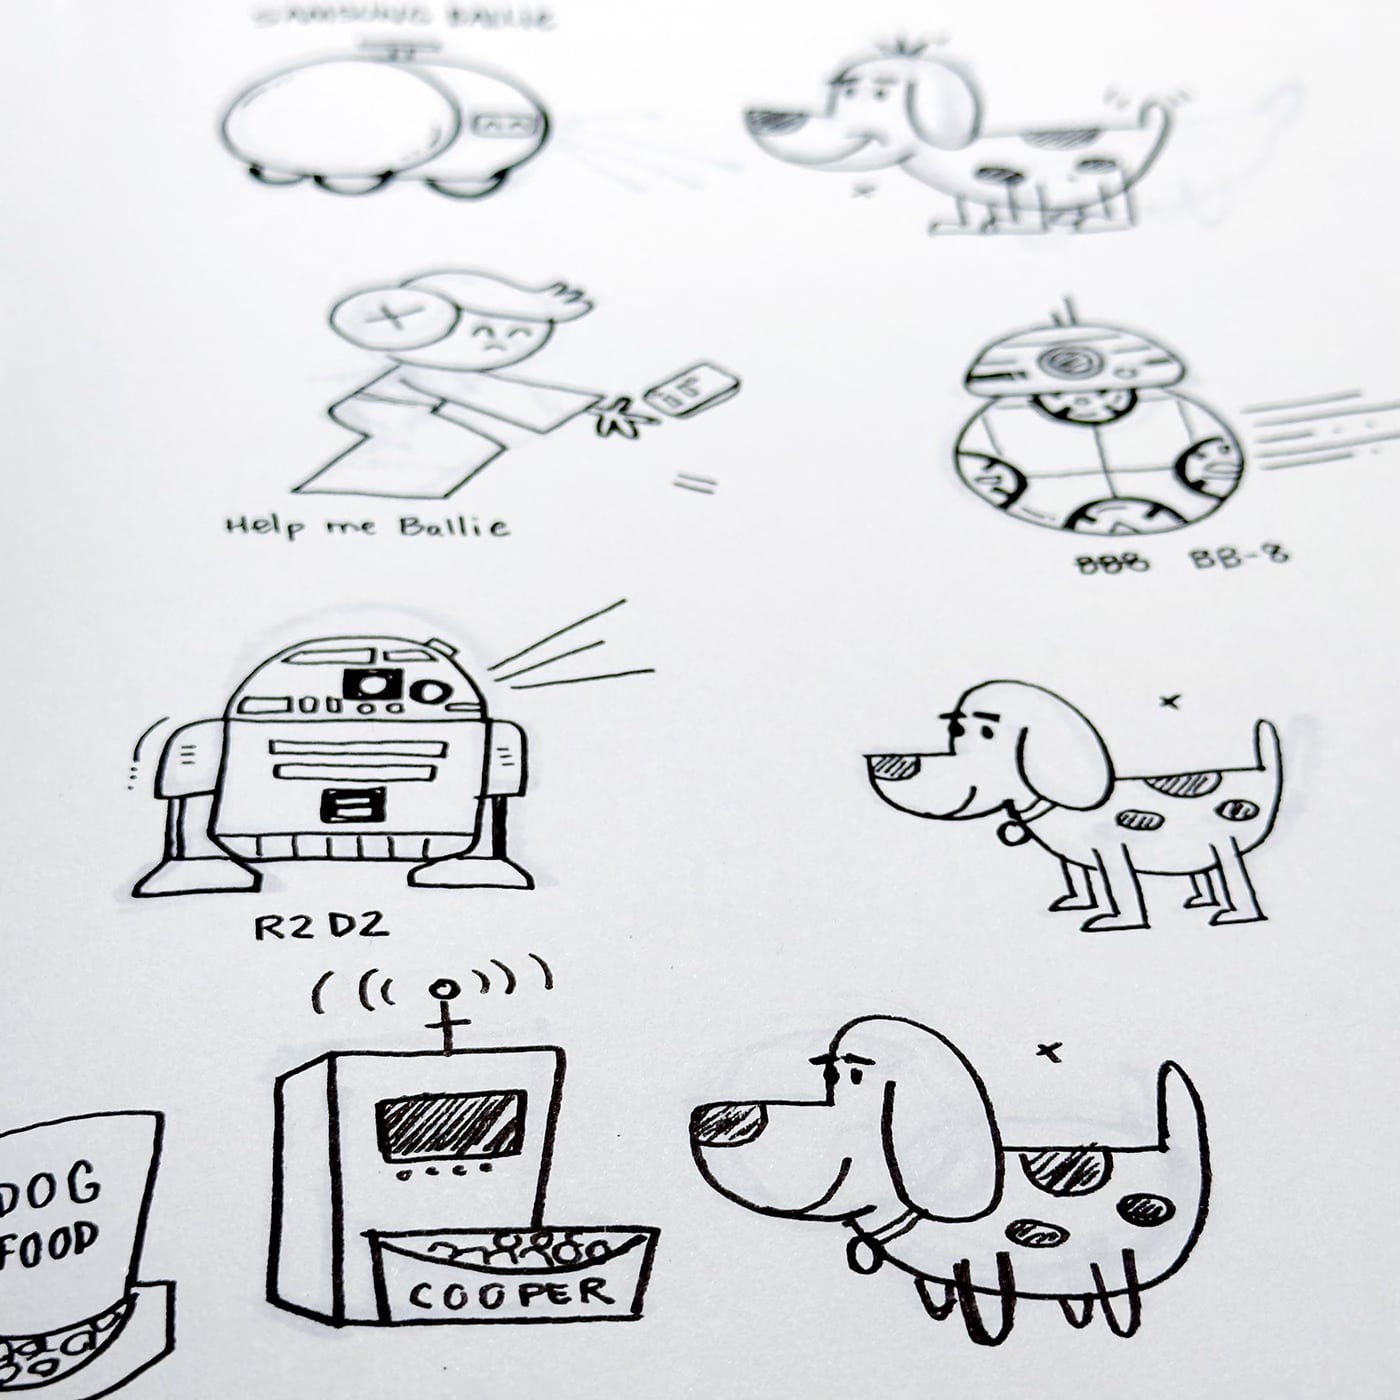 A sketchbook page with drawings of a cartoon dog and Star Wars characters.